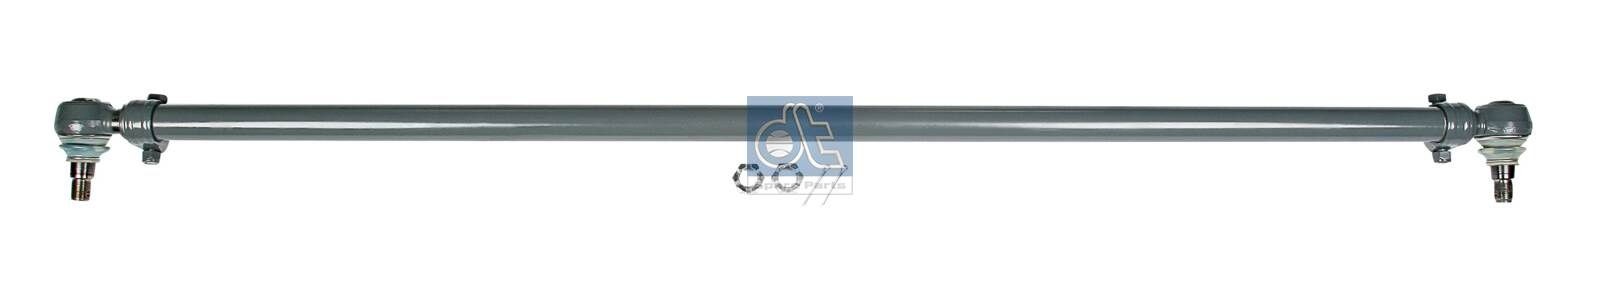 DT Spare Parts 7.30008 Rod Assembly 98402553